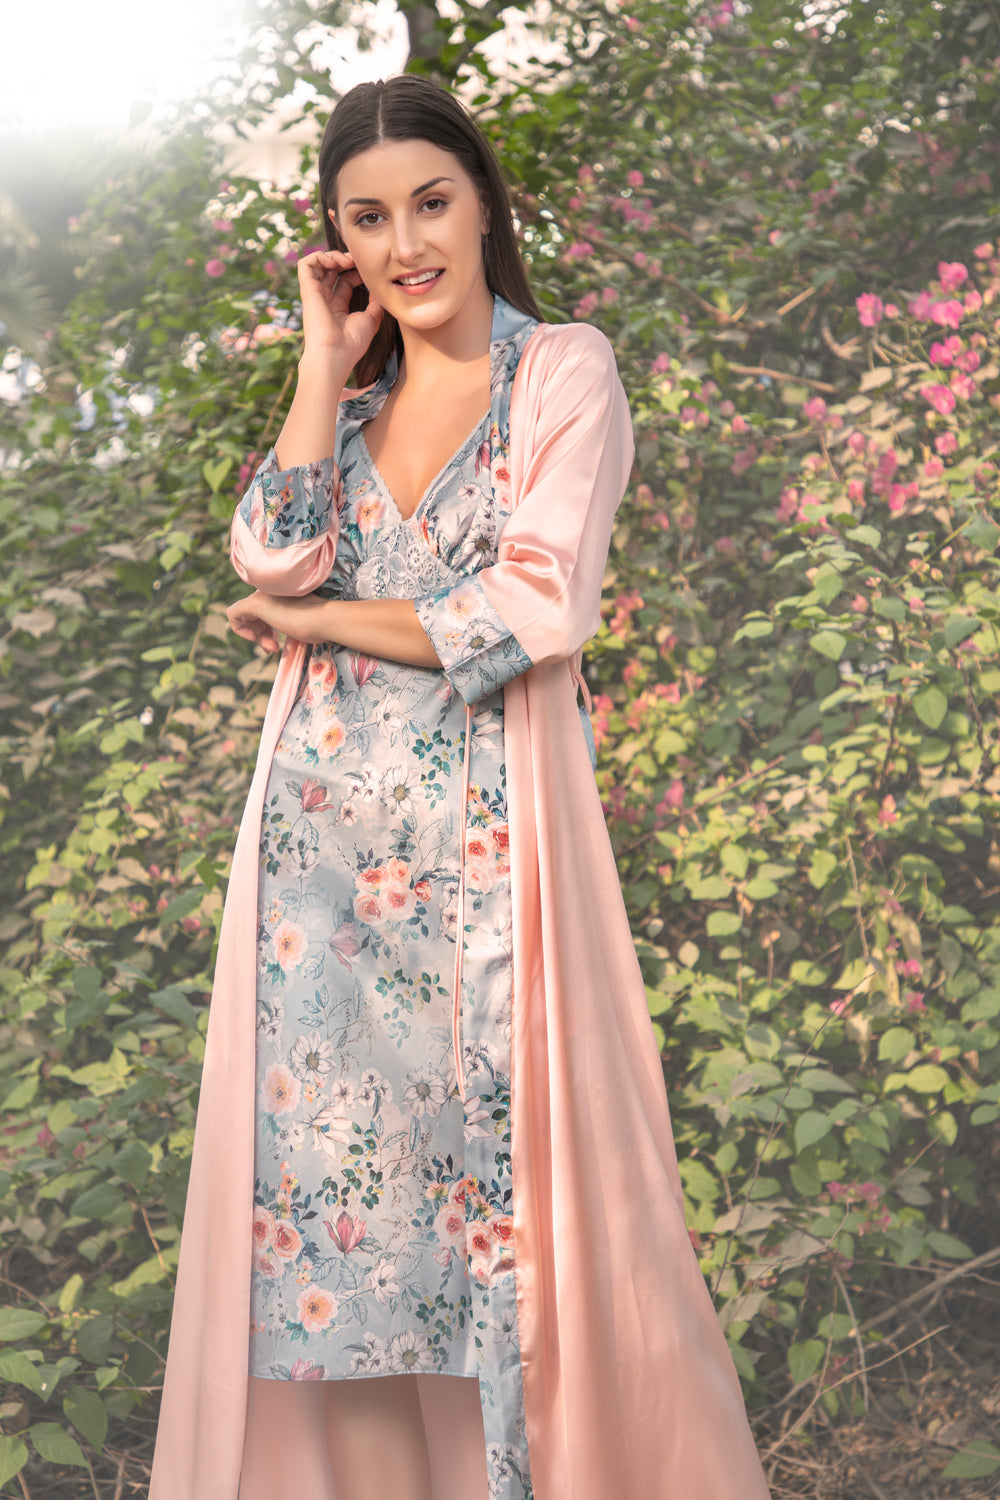 Floral print Long Nightgown set Private Lives